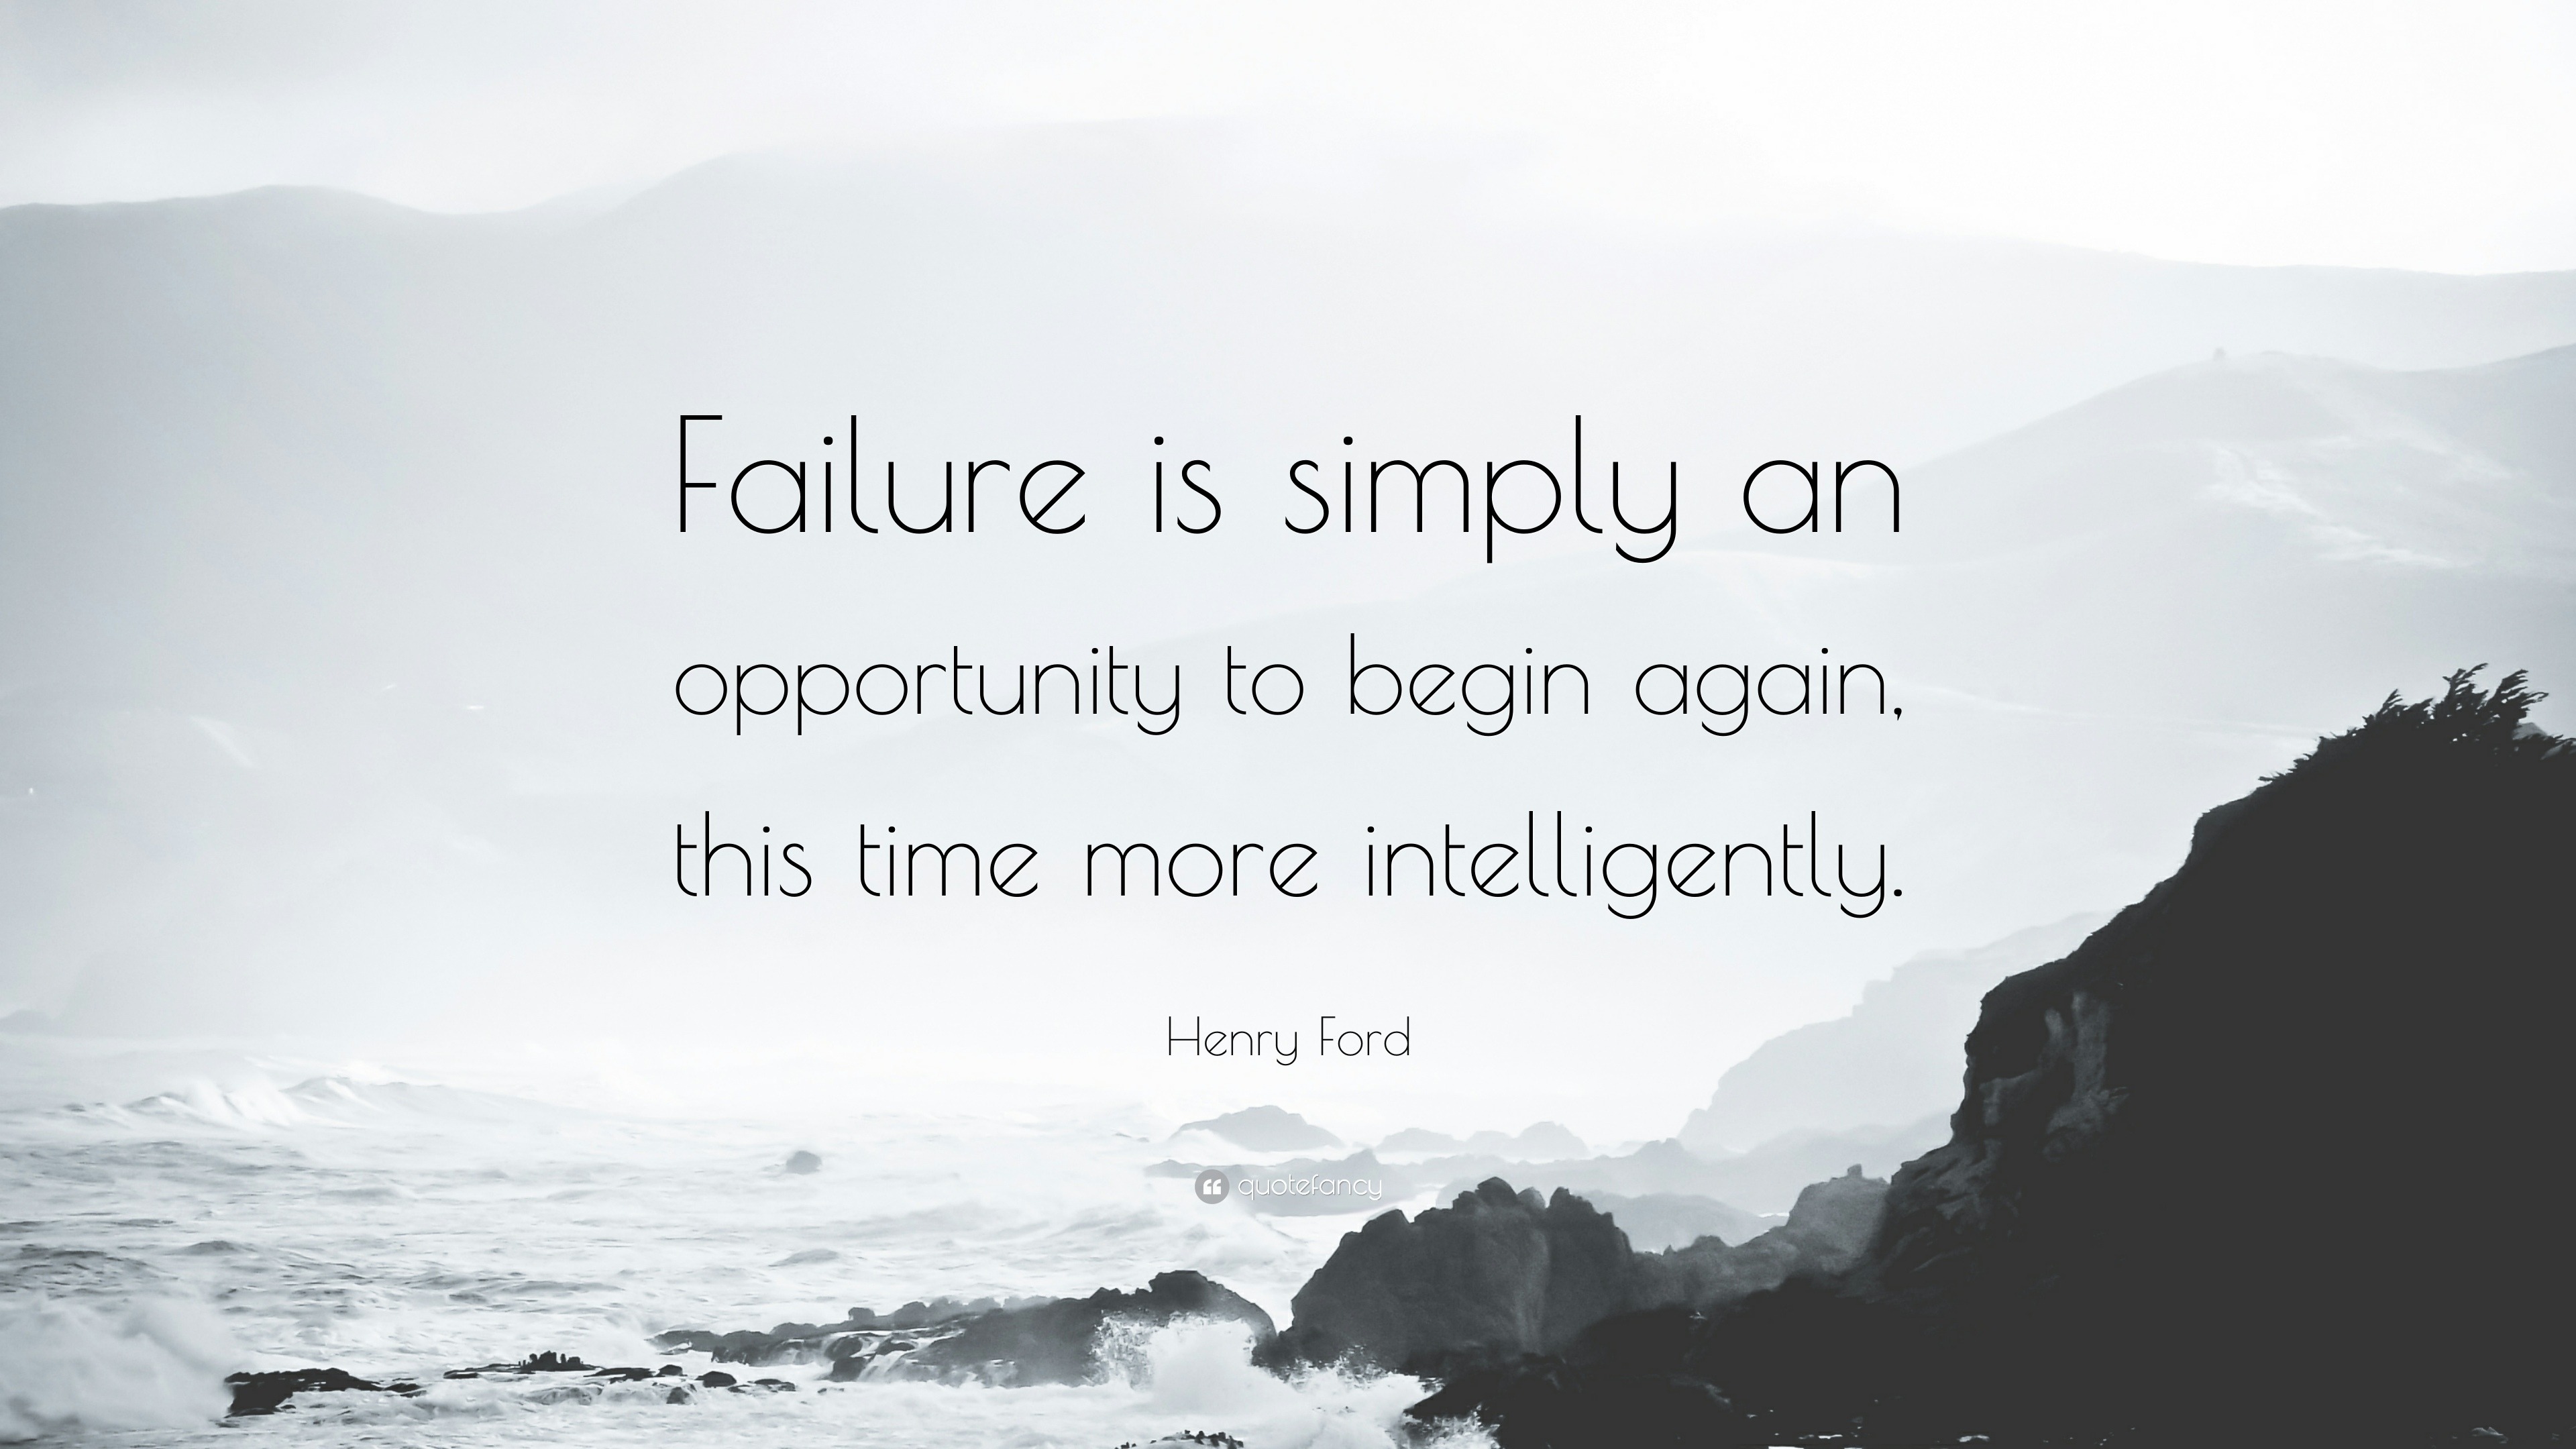 Henry Ford Quote: “Failure is simply an opportunity to begin again